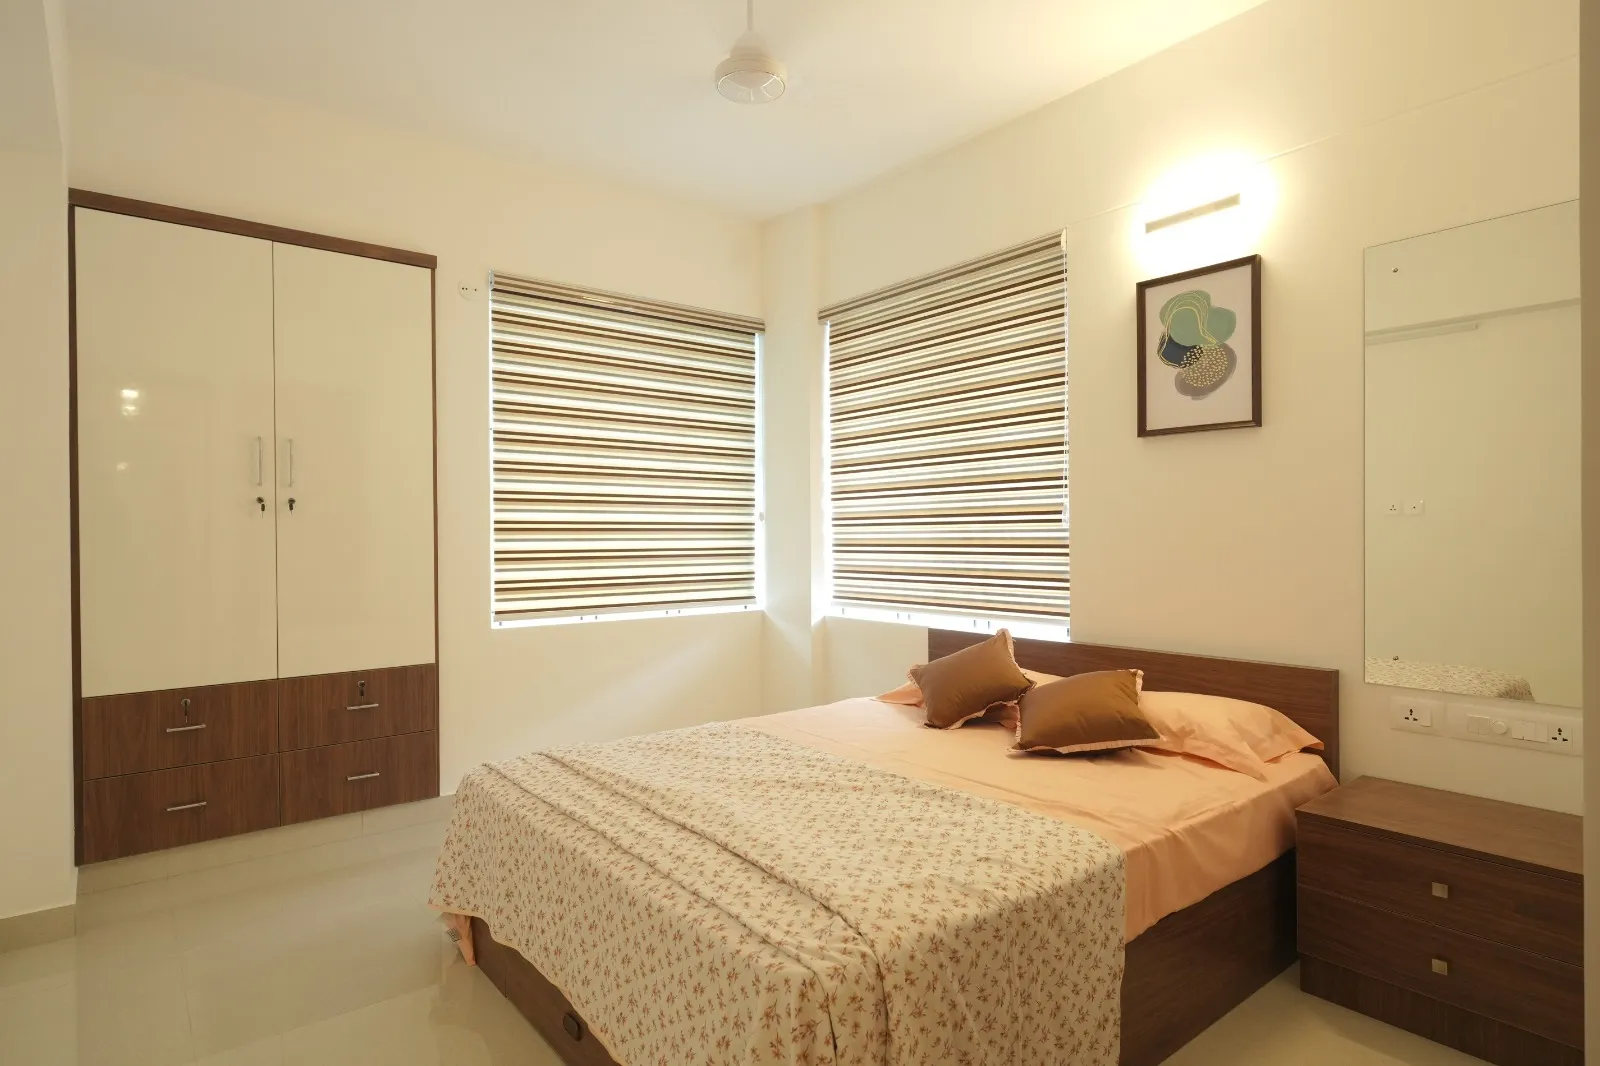 Flats for sale in Trivandrum